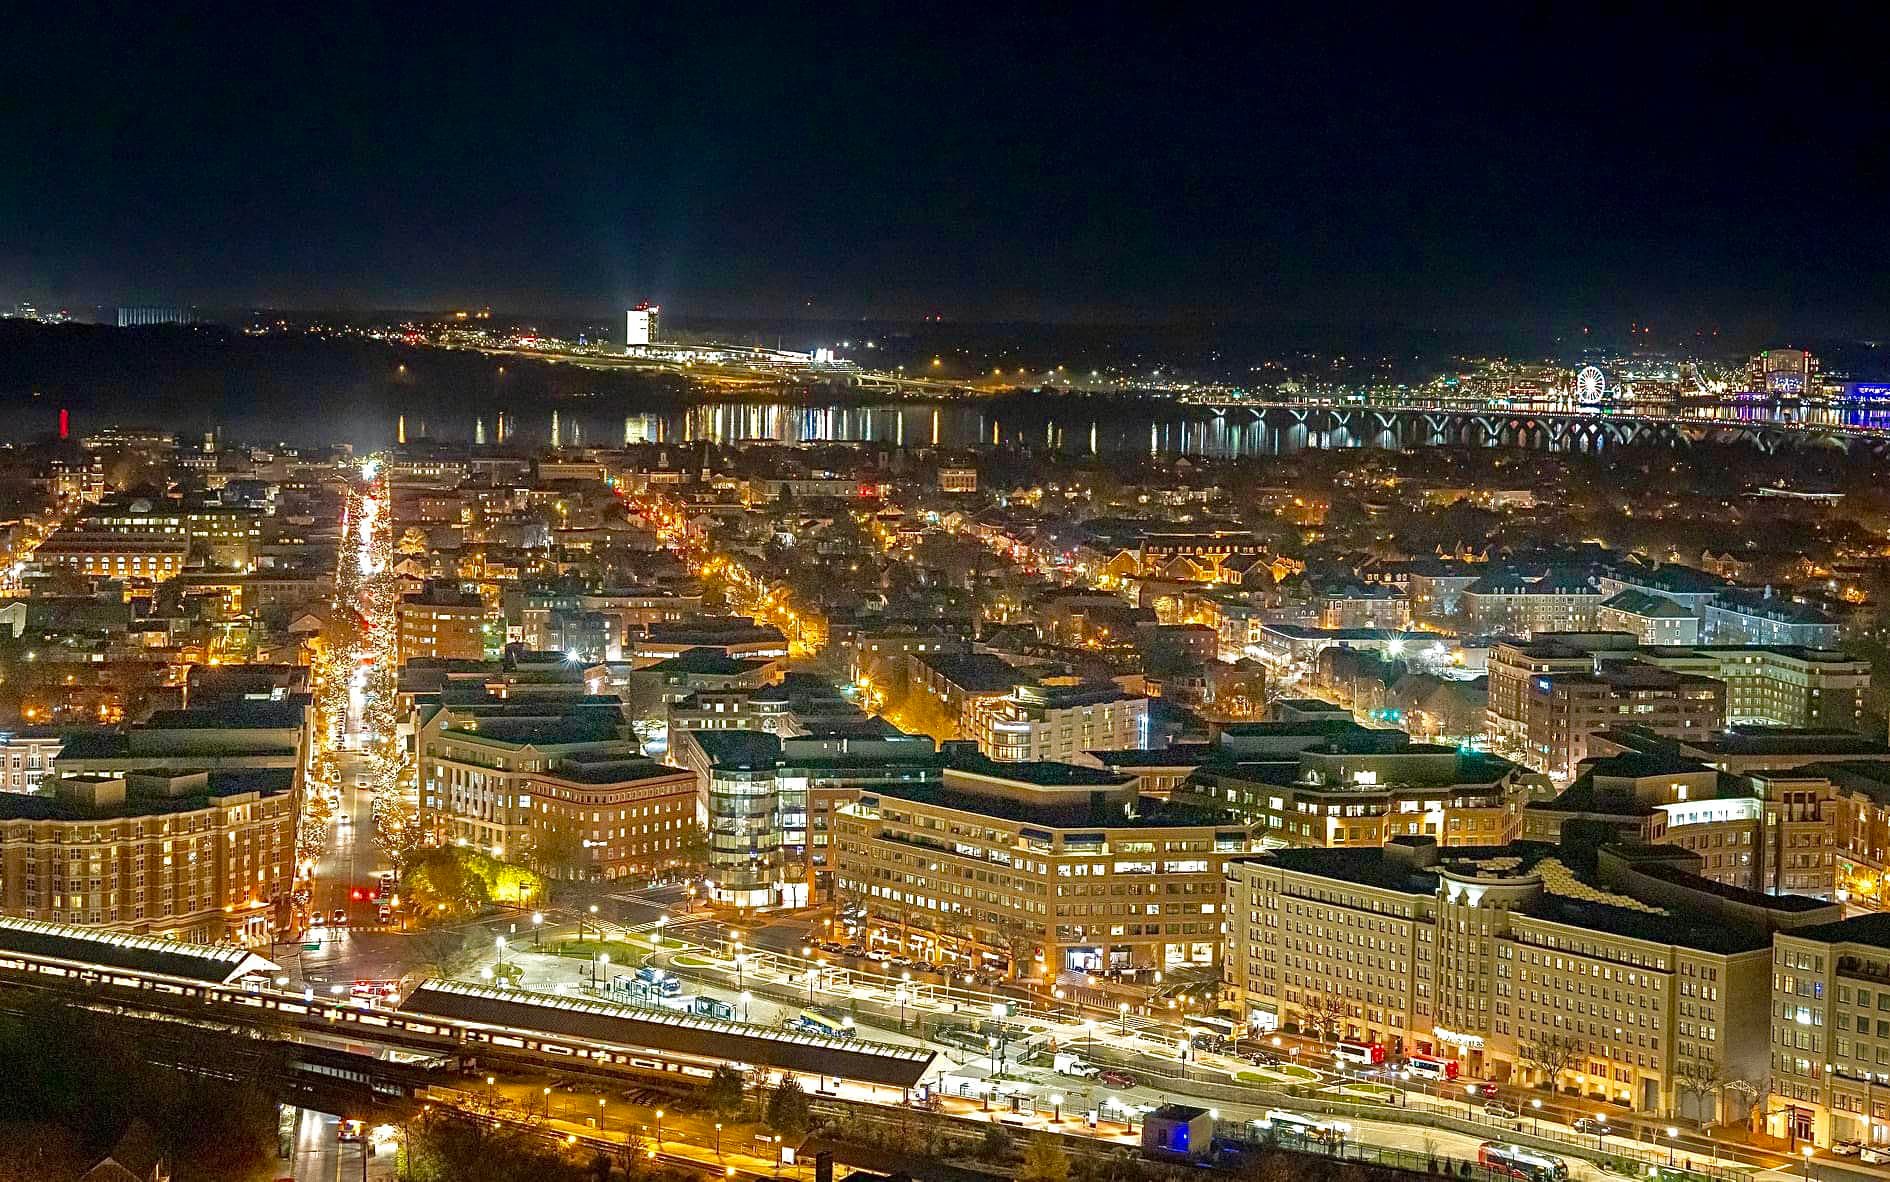 Nighttime arial photo of Old Town Alexandria all aglow taken by Ted Hovis atop the Masonic Memorial. 